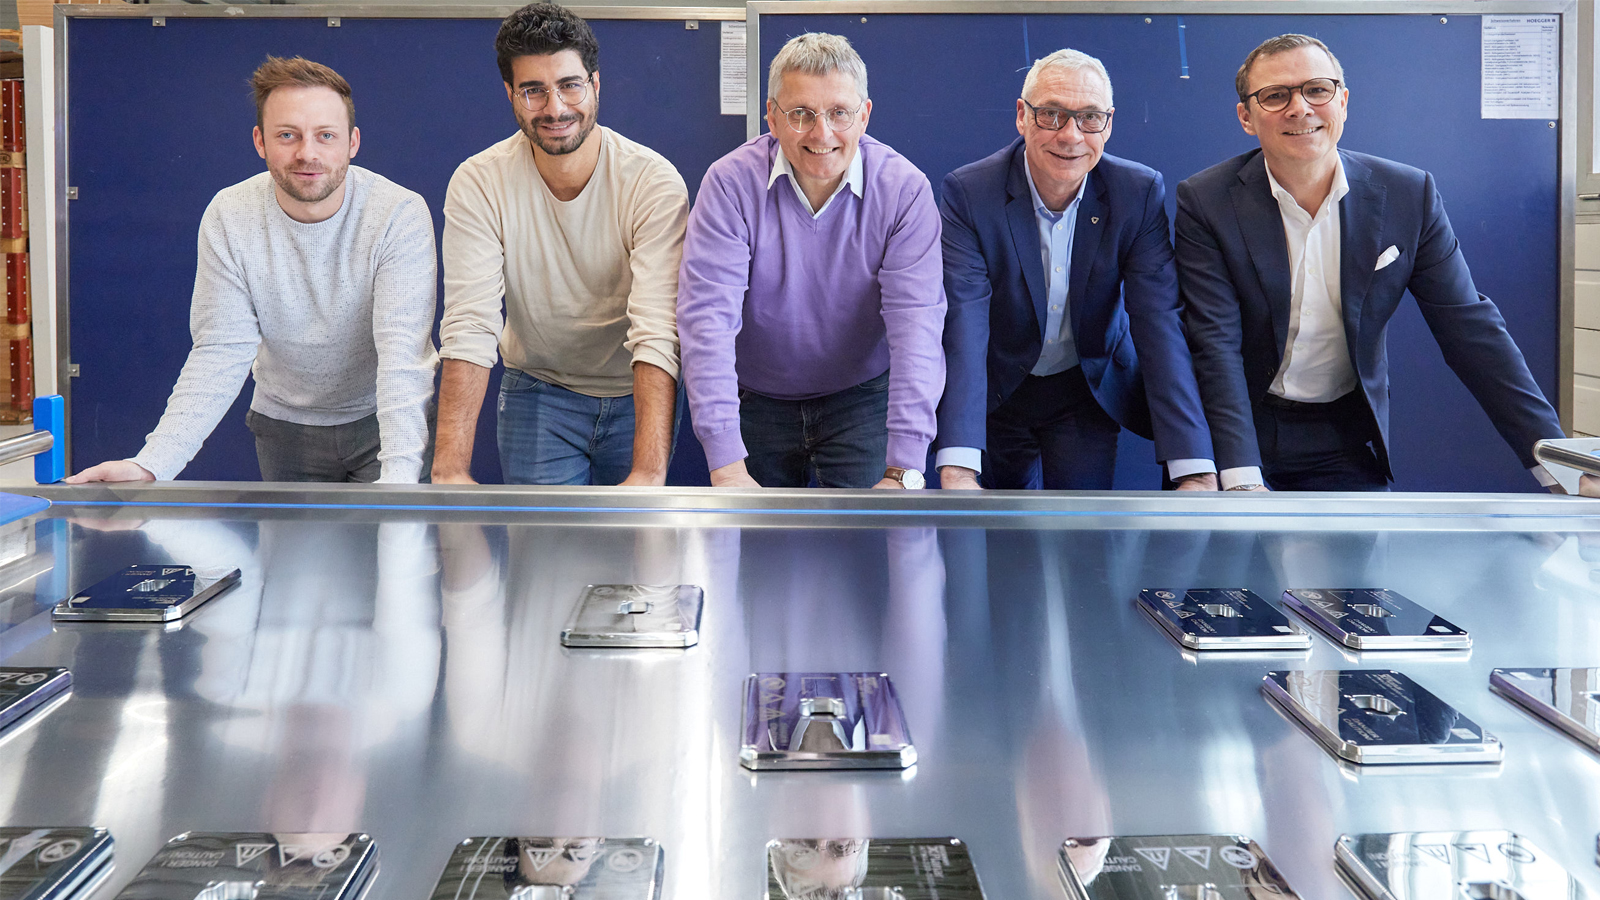 Project participants (from left to right): Thomas Gubser, Technical Support at Beckhoff Switzerland, Automation Engineer Fatih Yaman, Product Developer Klaus-Dieter Schroff, and Sales Manager Slicing Gerd Stratenwerth (all Provisur), as well as René Zuberbühler, Managing Director Beckhoff Switzerland 